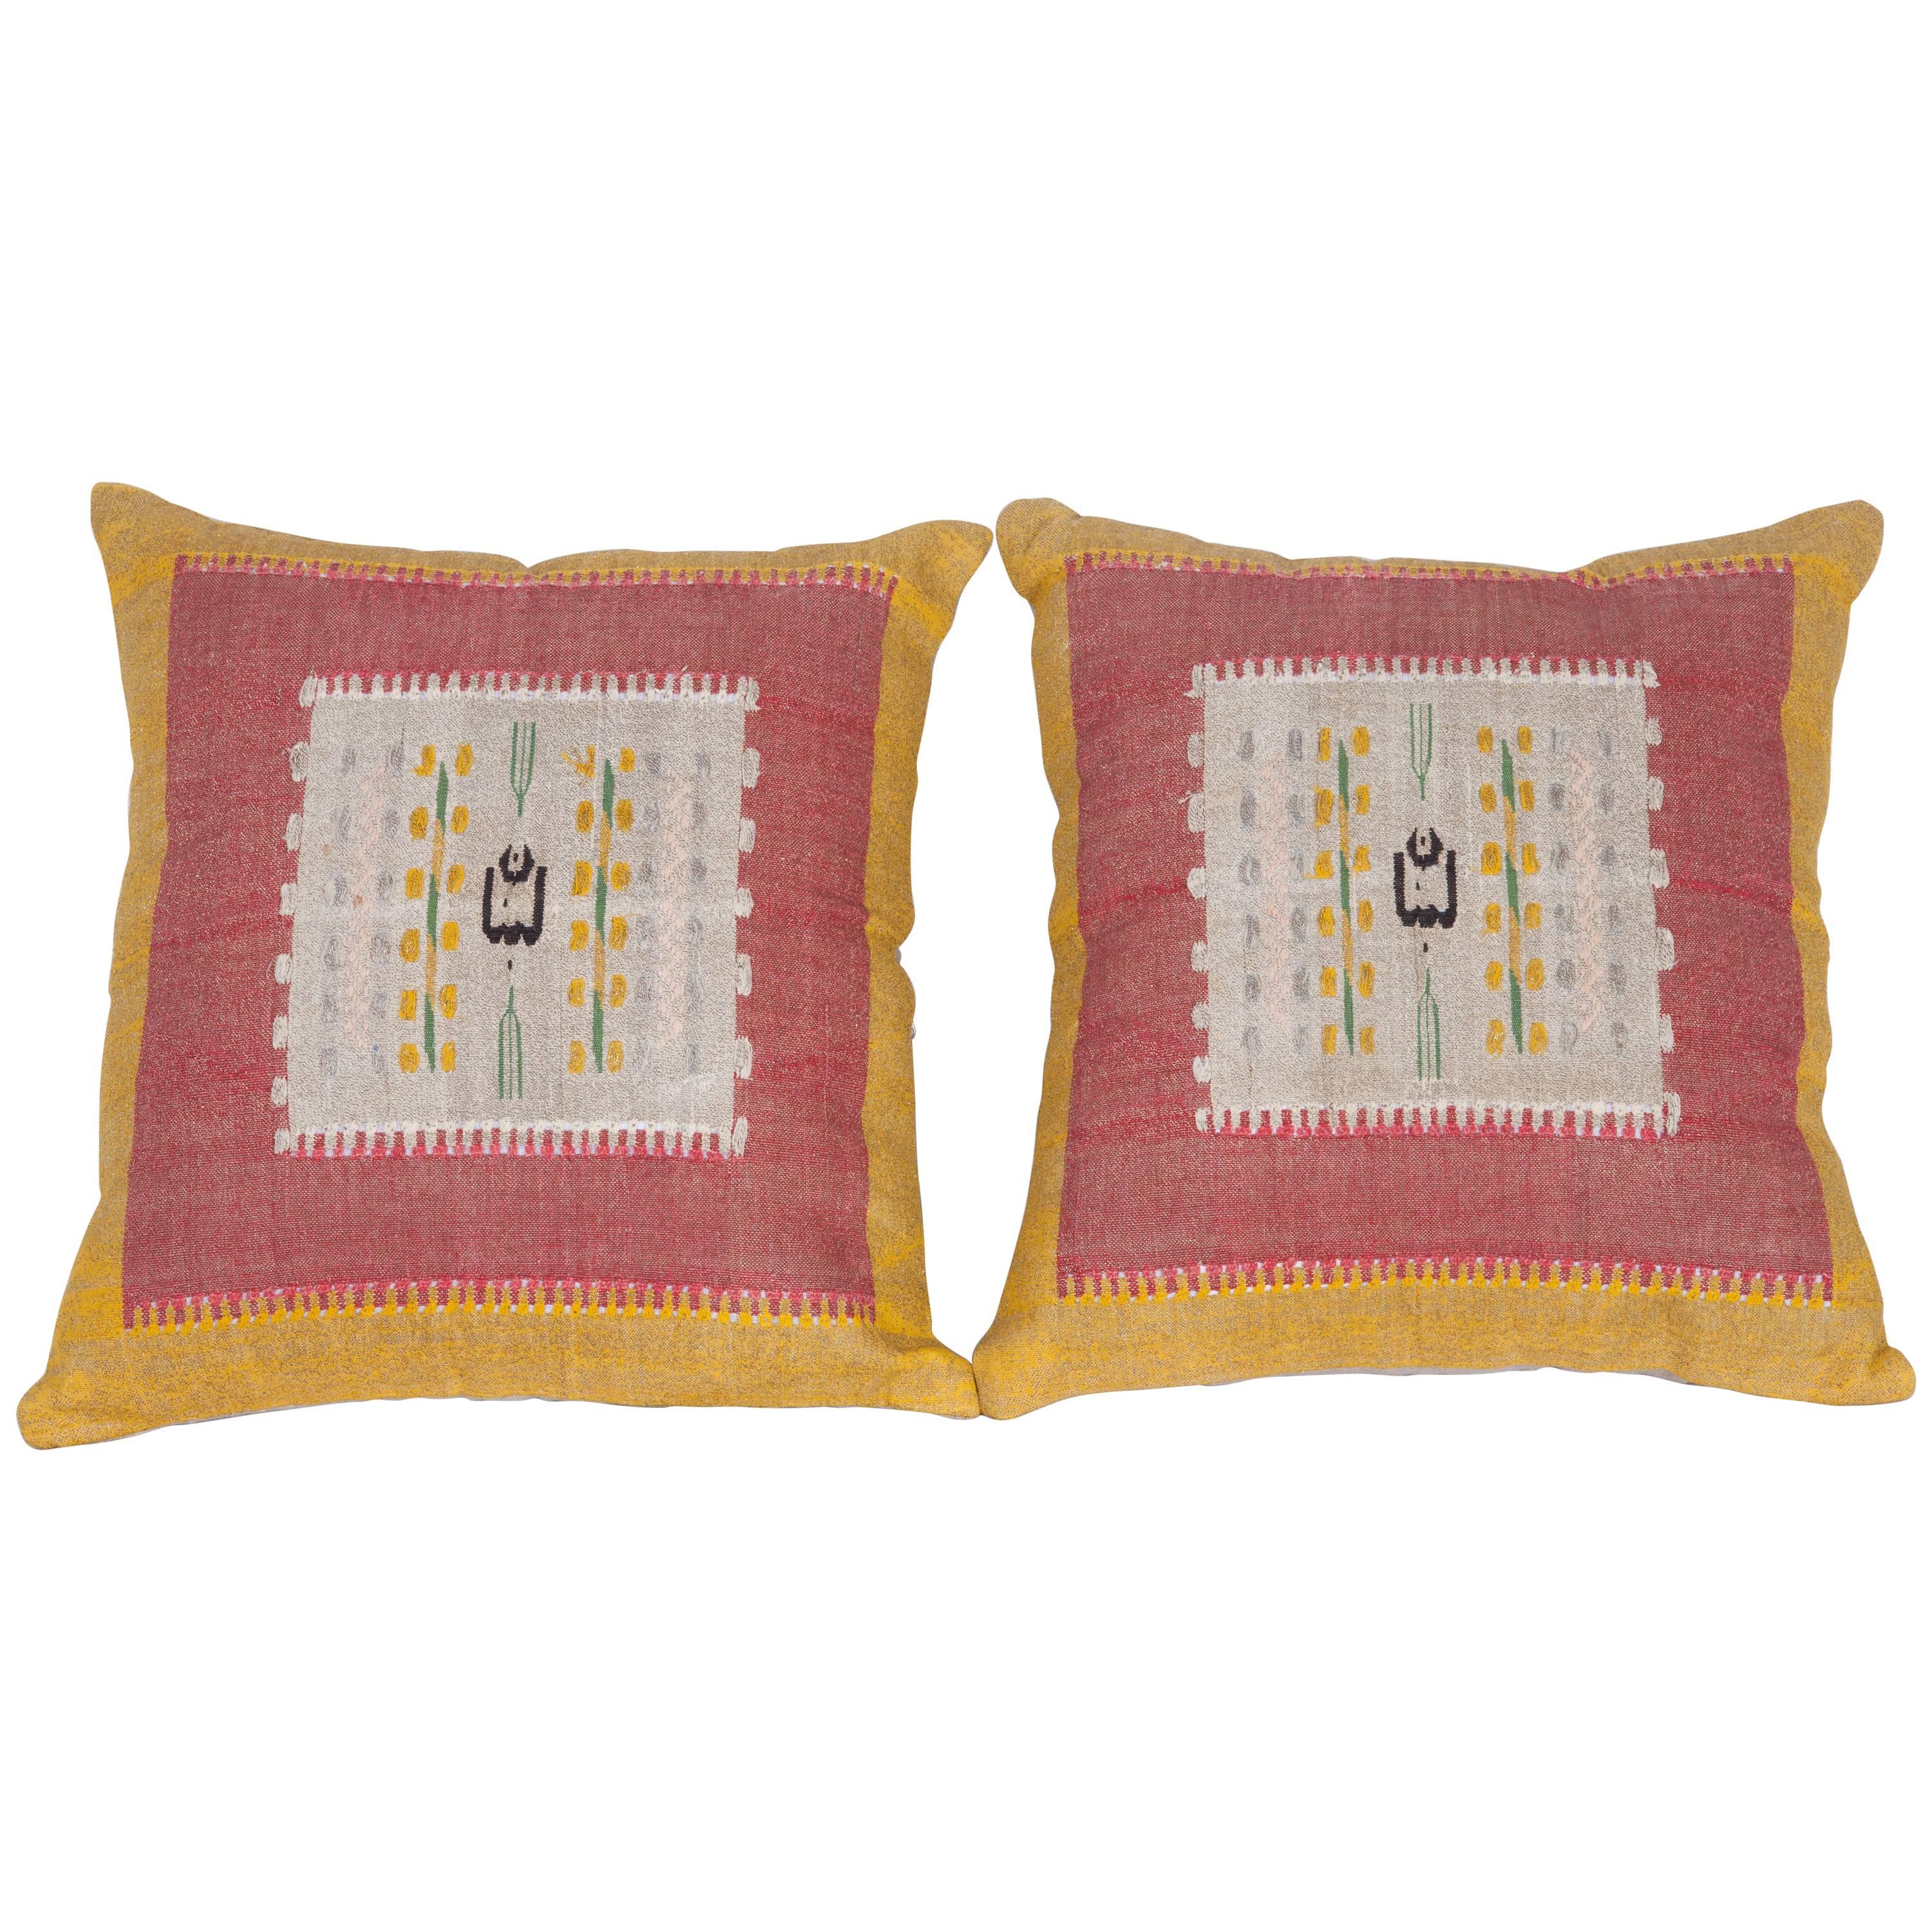 Antique Pillows Made Out of a Middle Eastern Pillow Tops